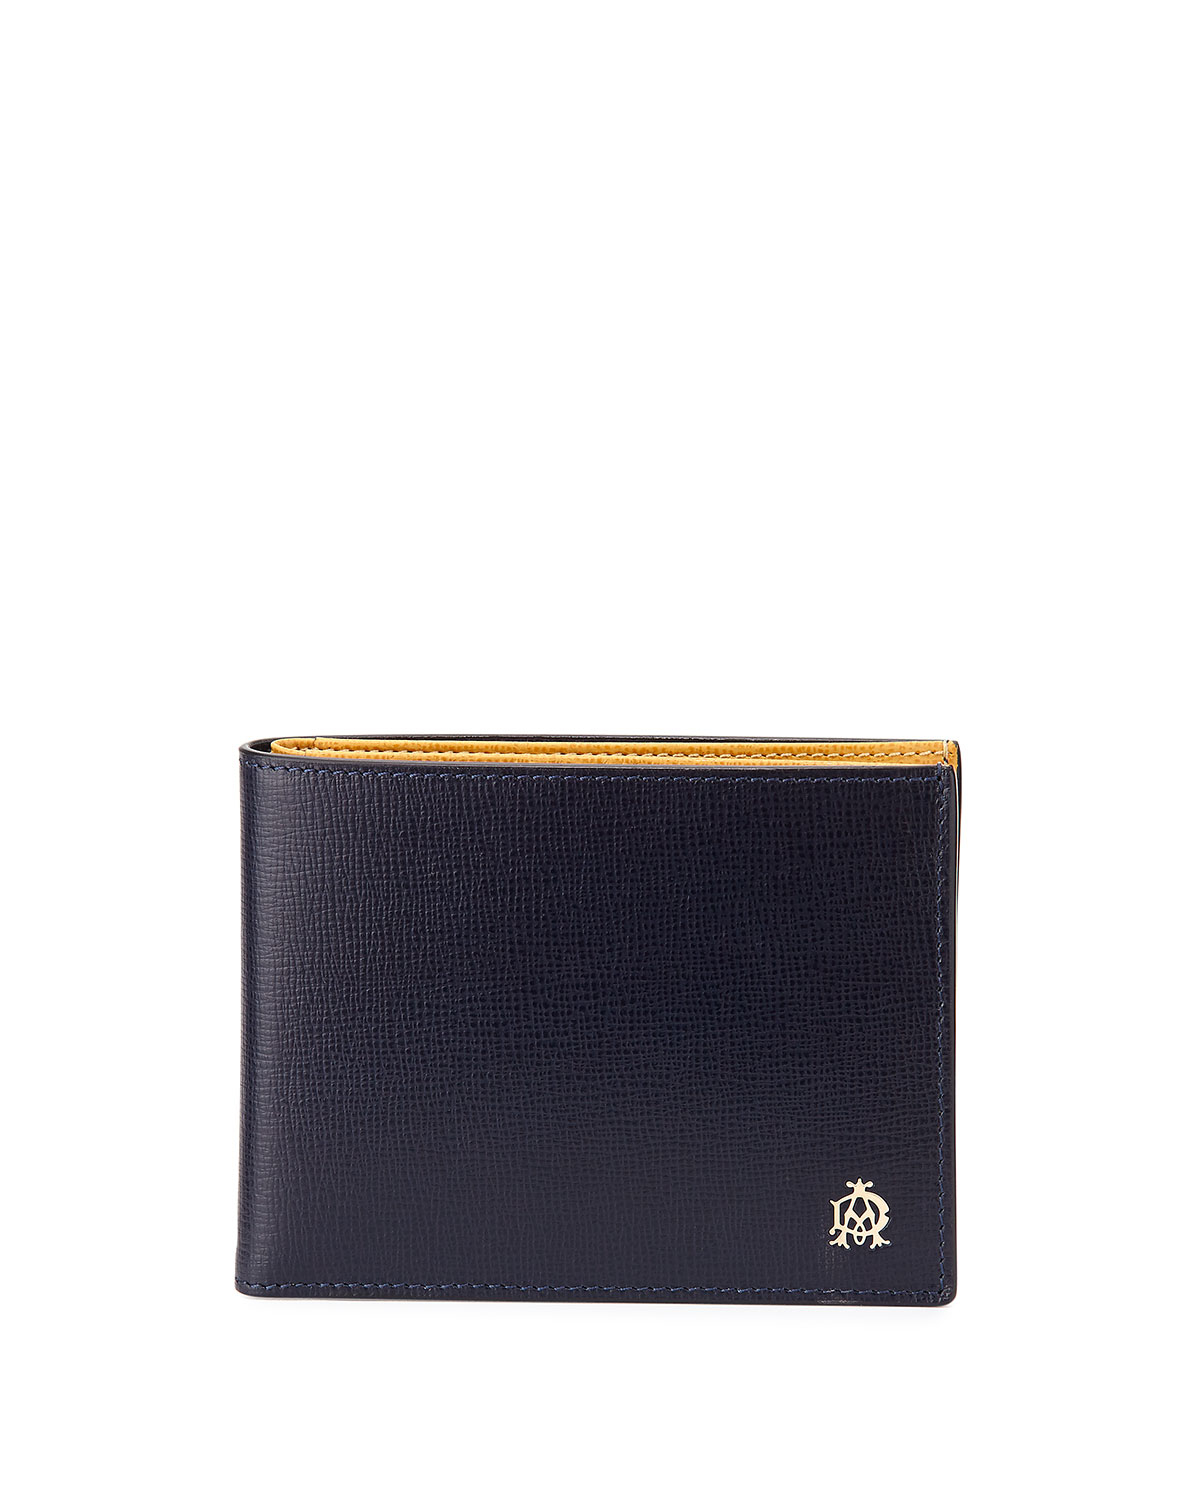 Lyst - Dunhill Leather Wallet in Blue for Men